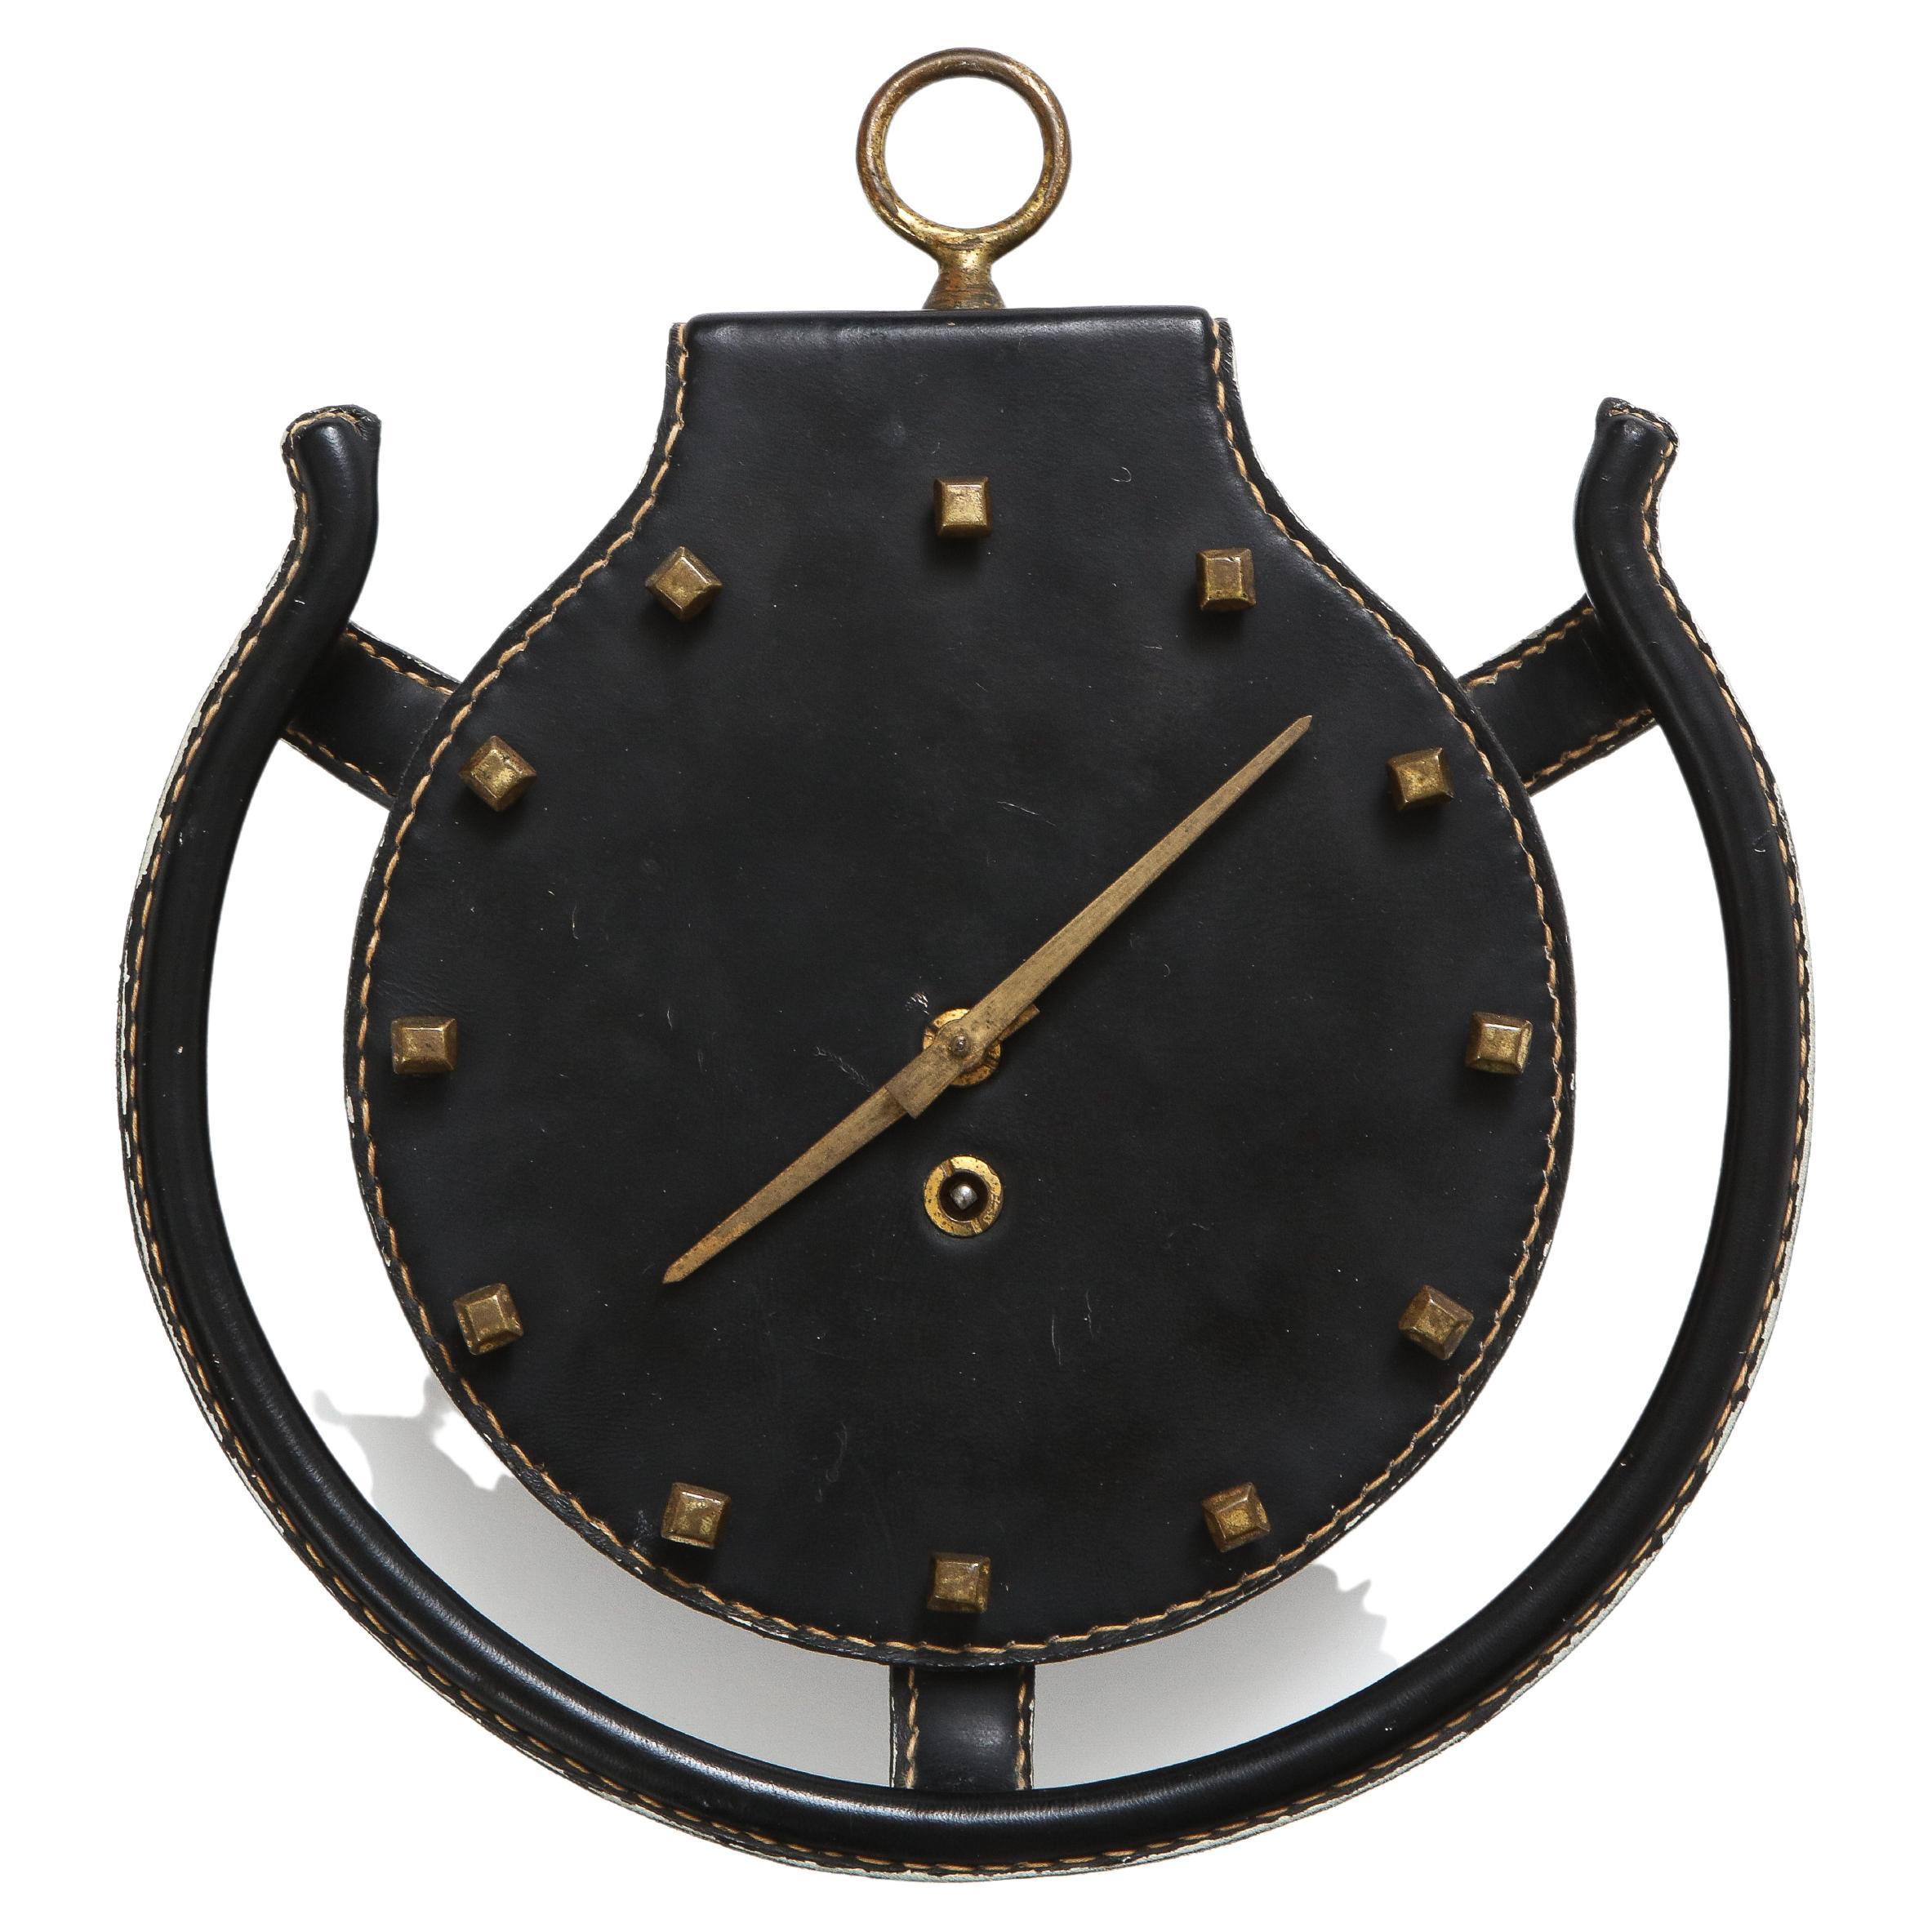 Jacques Adnet rare horseshoe wall clock covered in original black saddle-stiched leather suspended by brass hanging ring with hands and numbers in bronze which evoke farrier nails. Comes with wind up key. Restored and in working order.